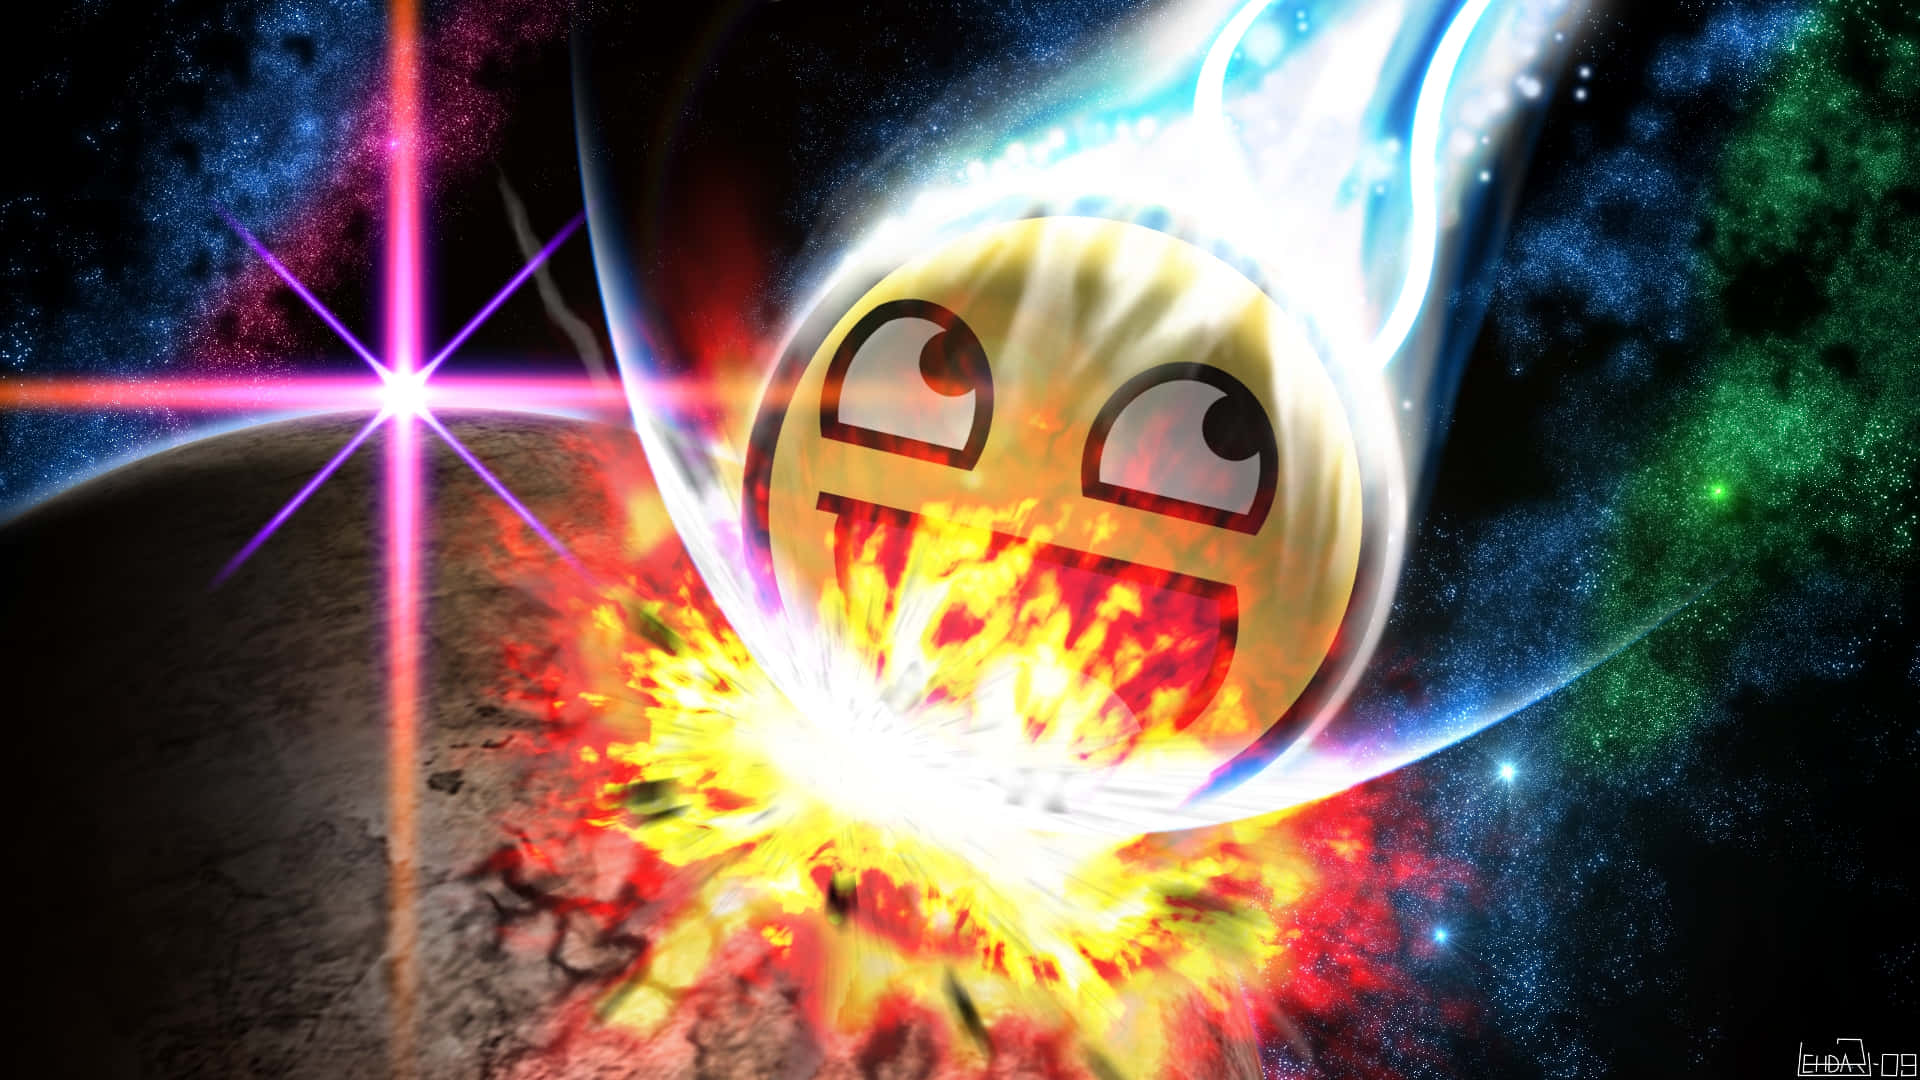 A Smiling Emoticion With A Fireball In The Background Wallpaper